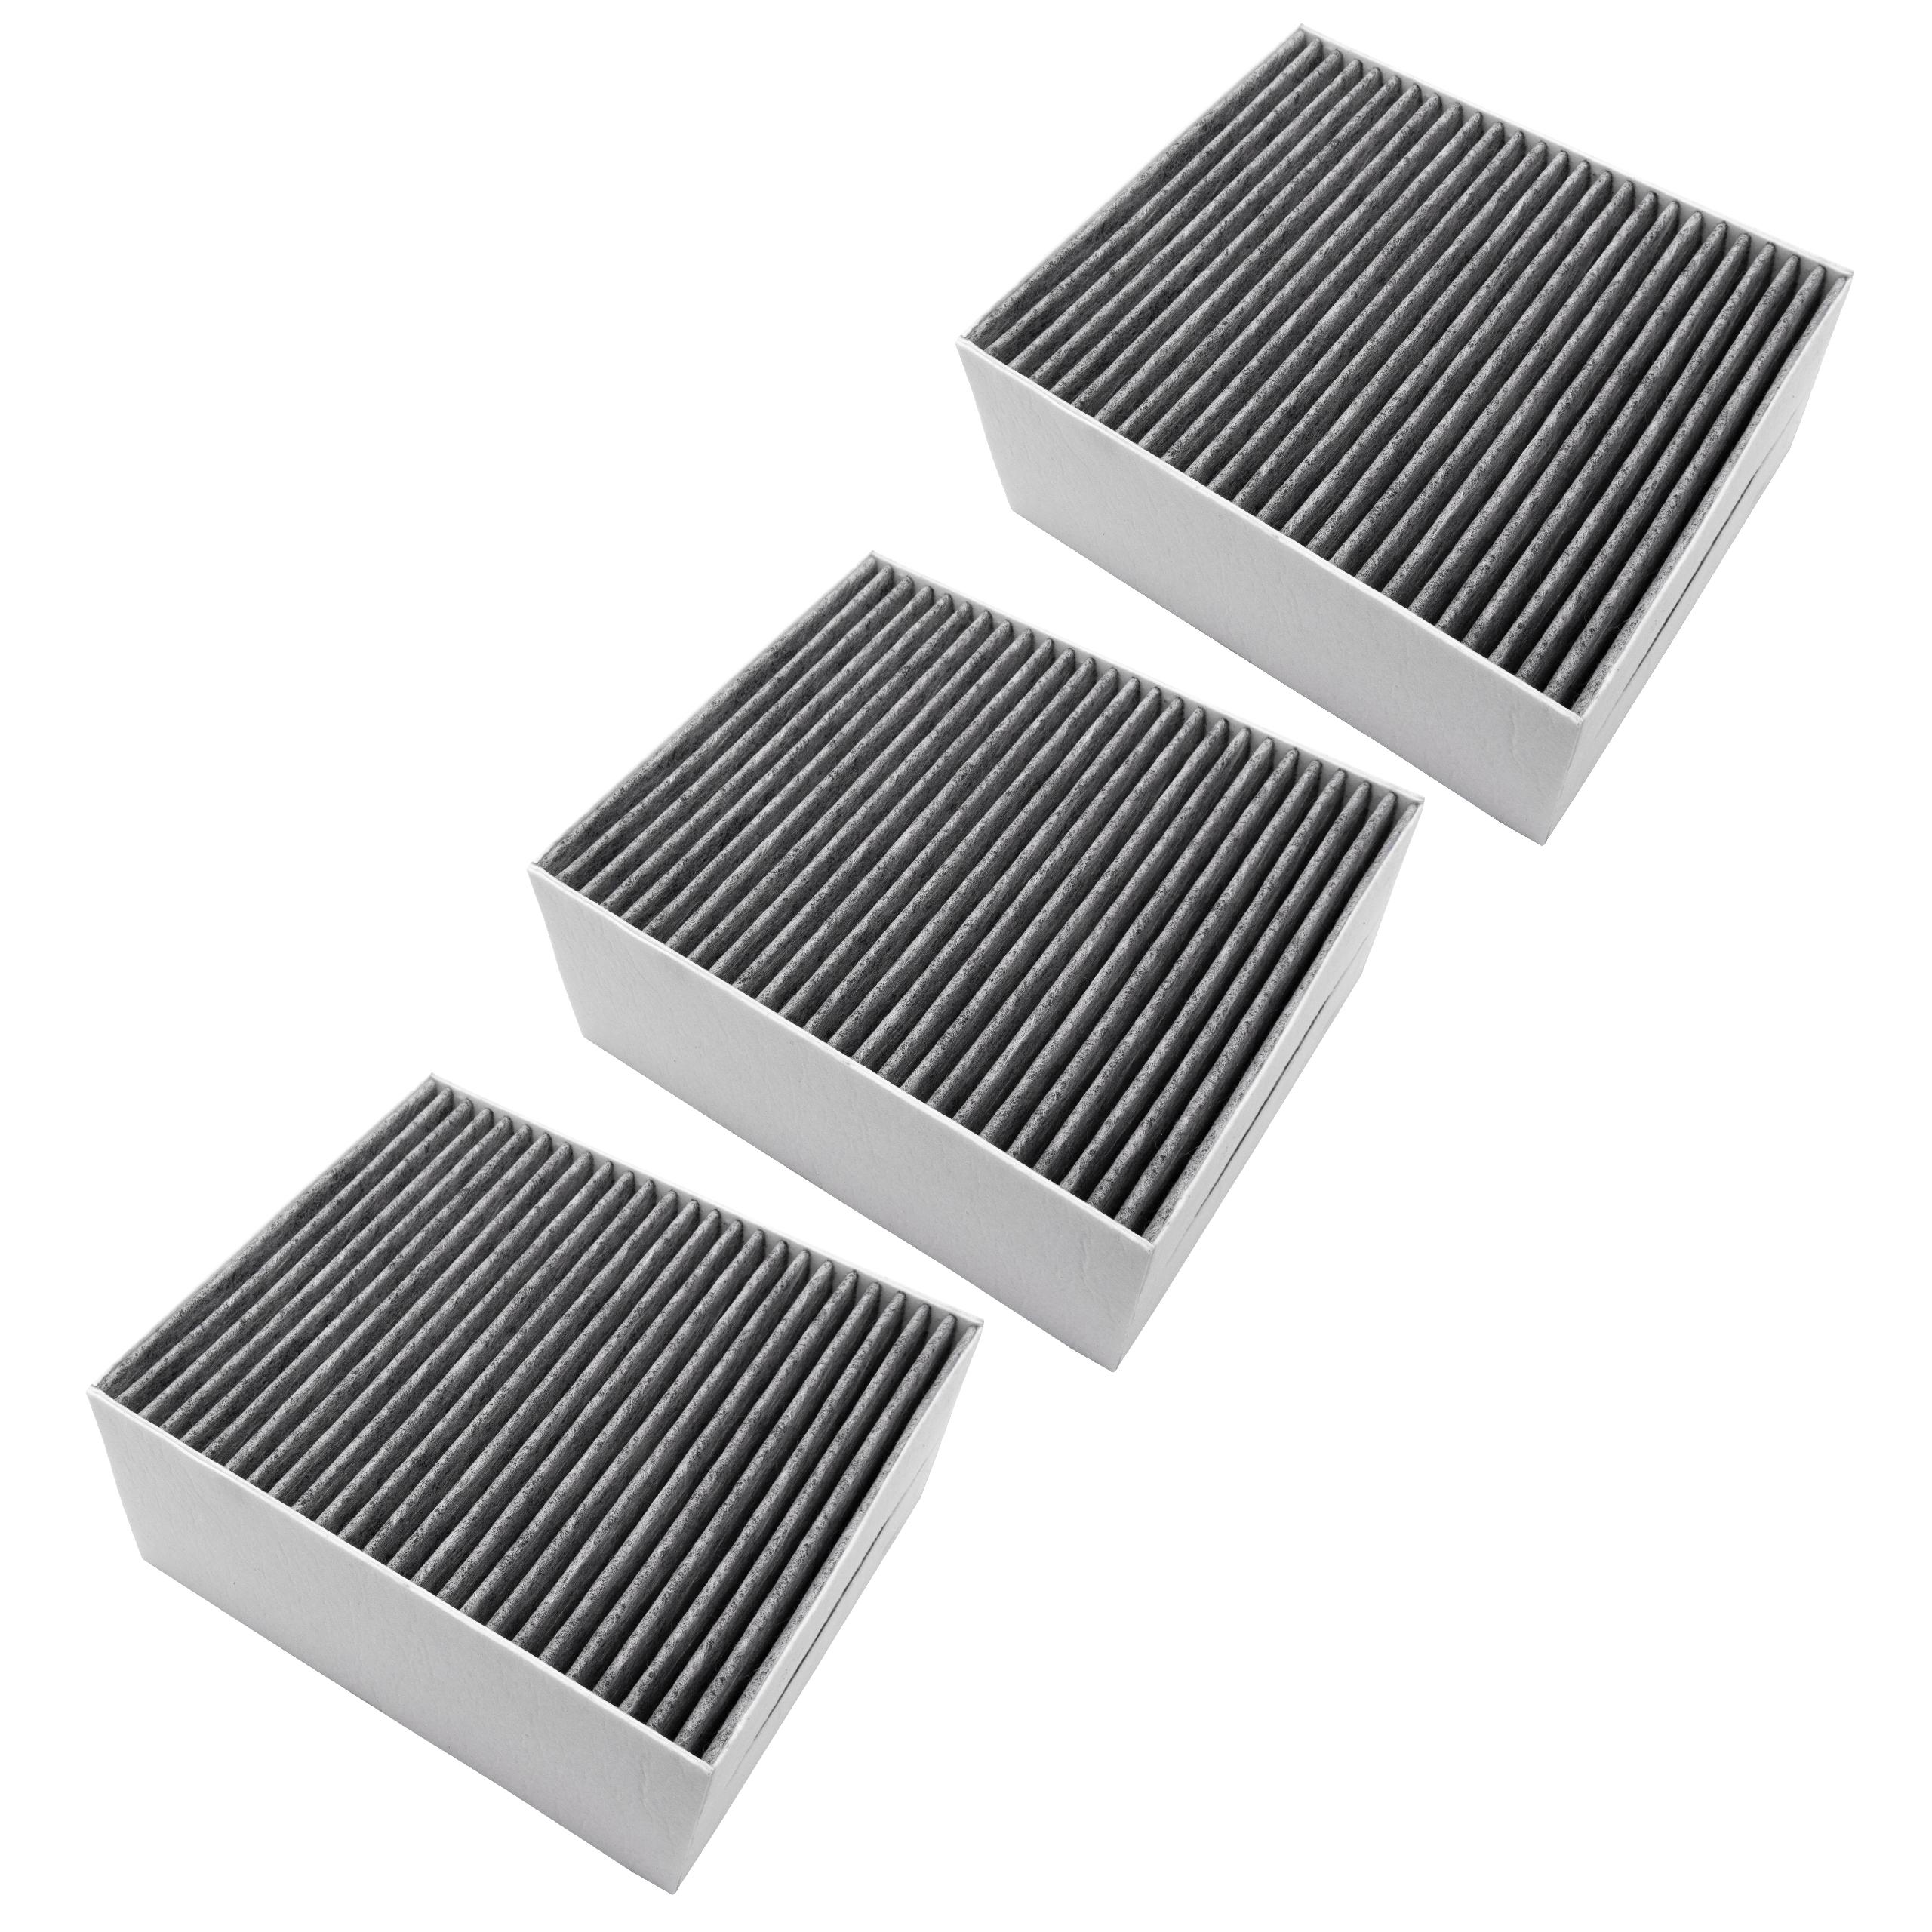 3x Activated Carbon Filter as Replacement for Bosch 00678460 for Siemens Hob etc. - 22.7 x 18.9 x 10 cm